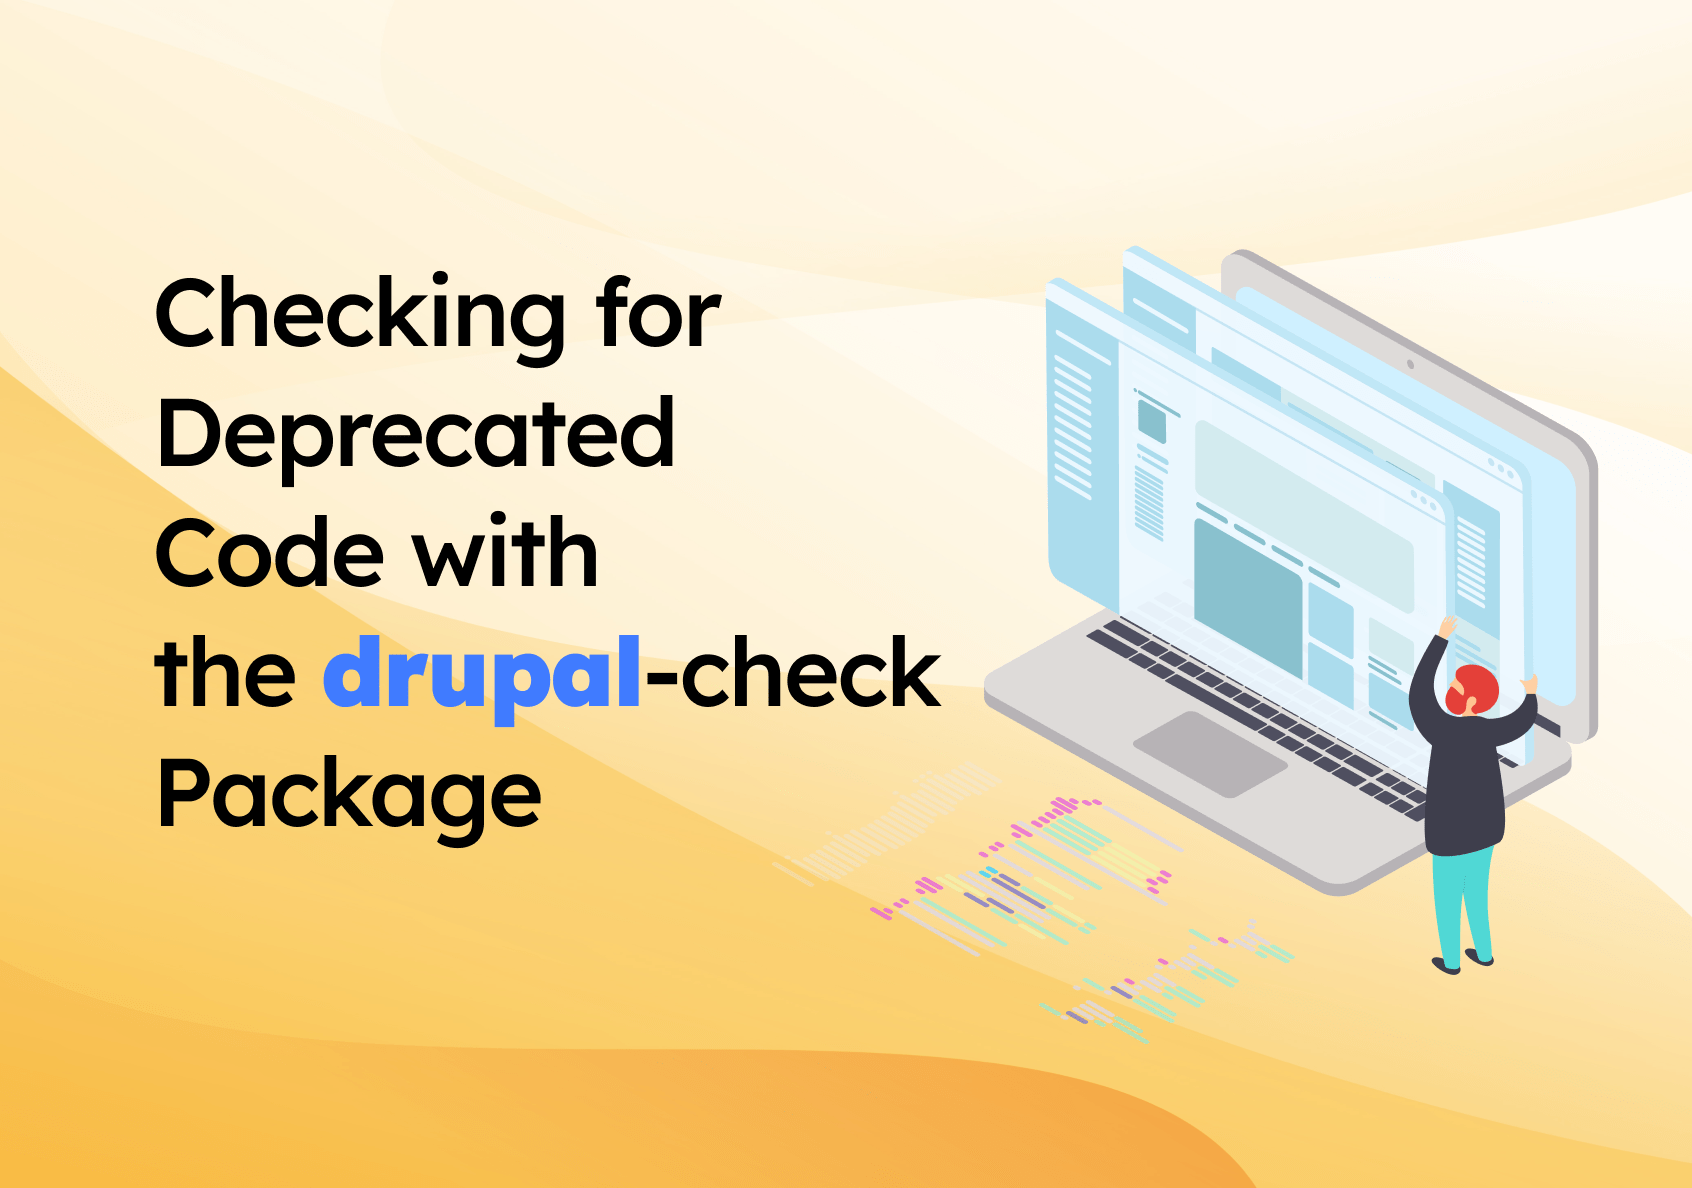 Checking for Deprecated Code with the drupal-check Package  image